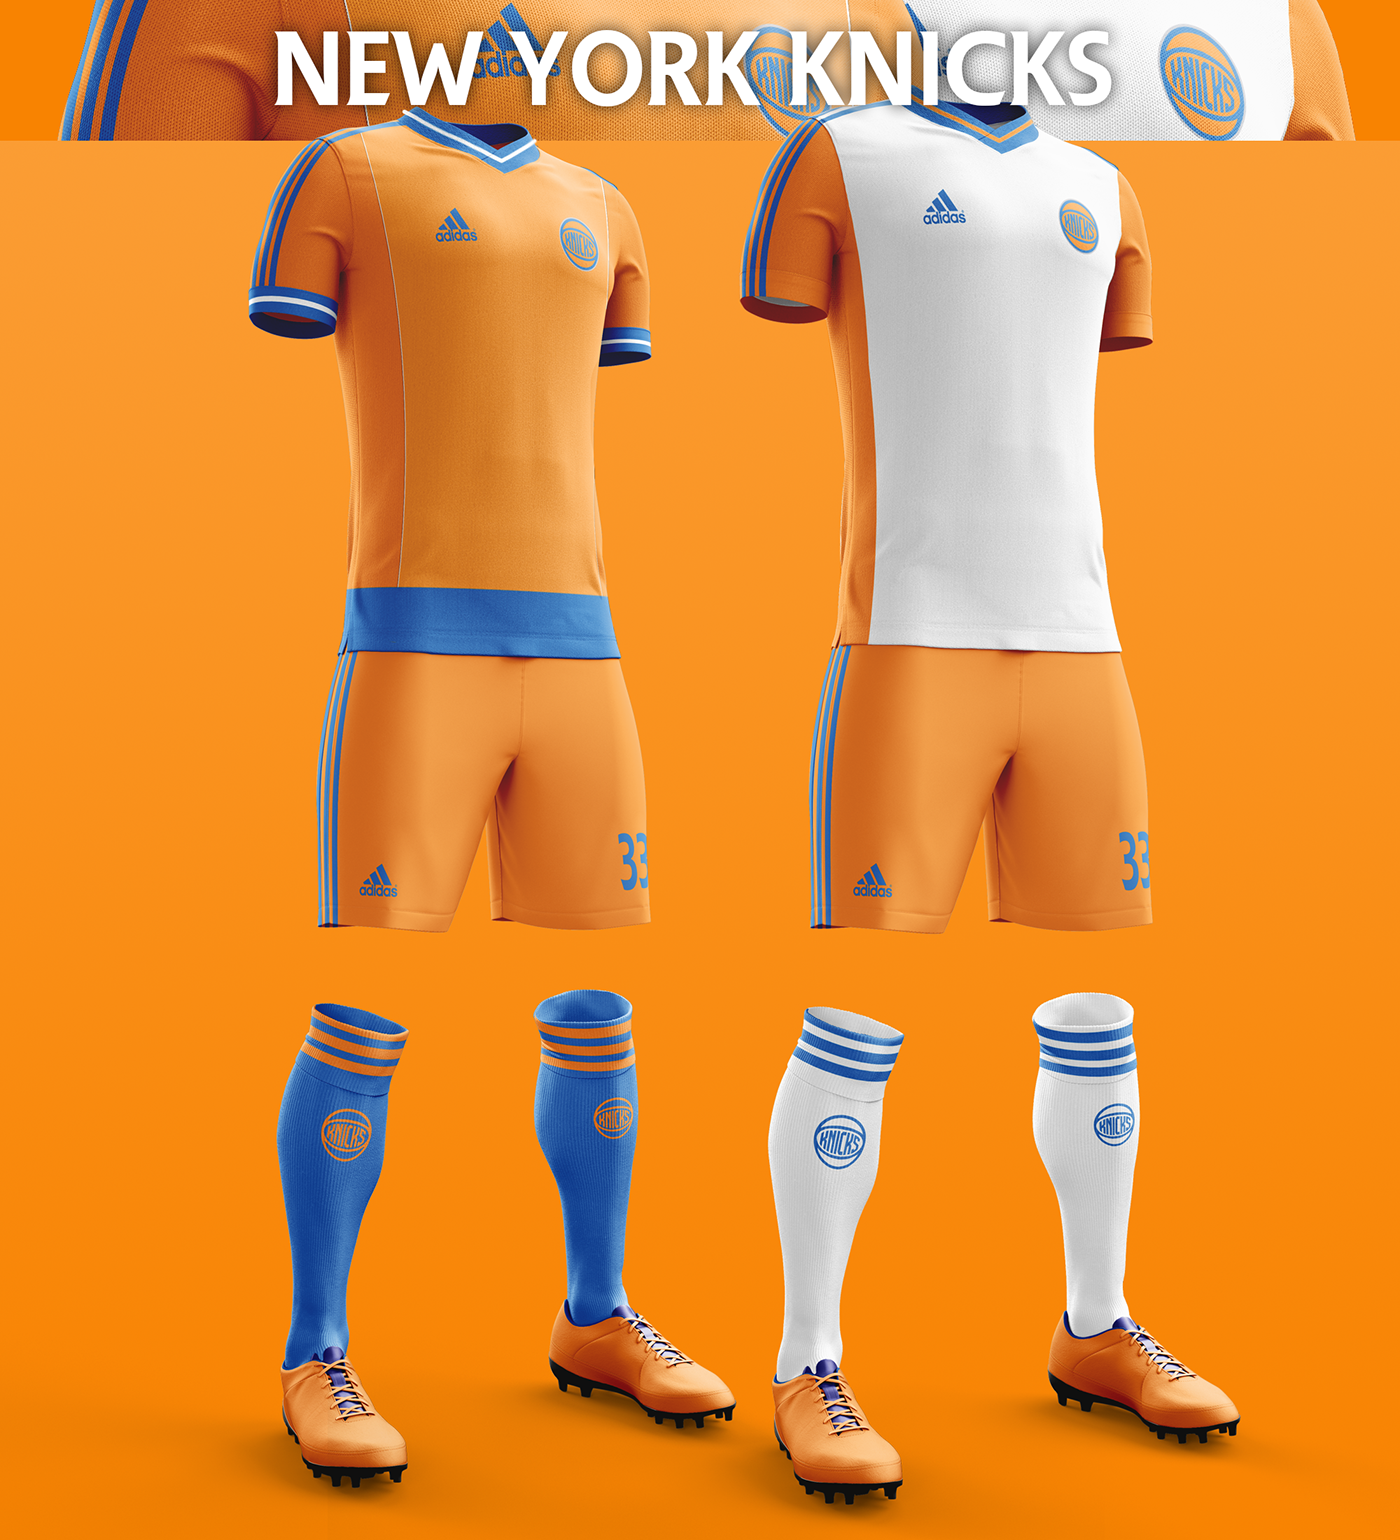 These NBA Football Kit Designs Are Incredibly Cool